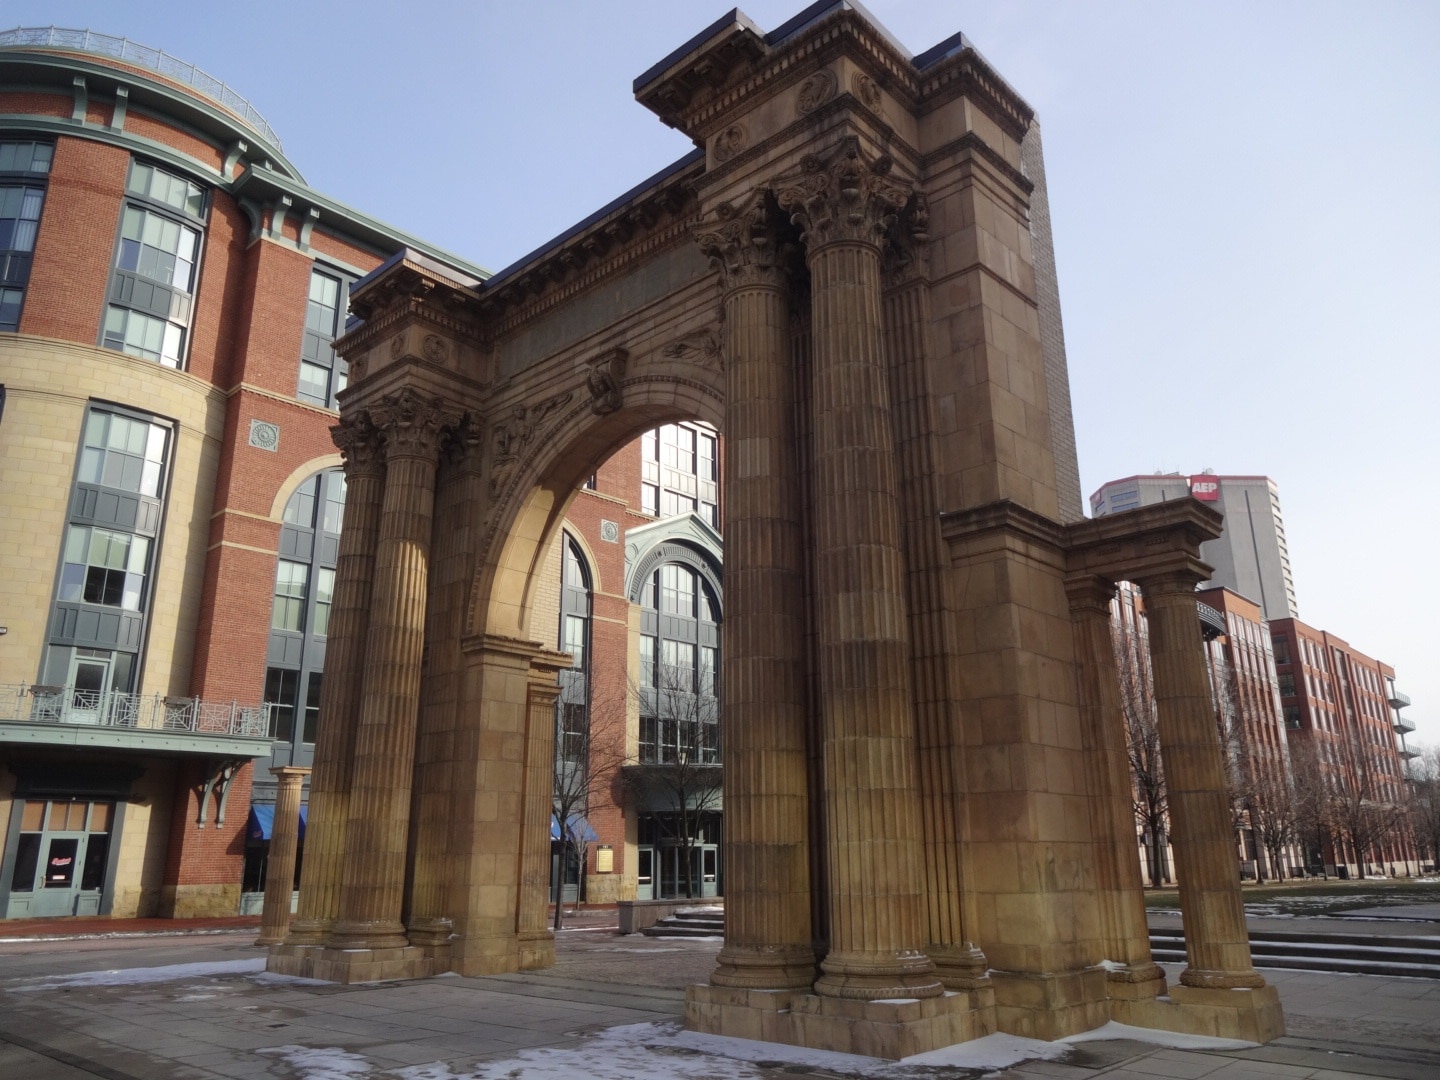 This arch is all that remains of Columbus Grand Union Station, the city's third and final train station. 

Built in 1897 and designed by Daniel H. Burnham and Company of Chicago, the train station was located in the current footprint of the Greater Columbus Convention Center. 

On October 22, 1976, demolition began despite having been listed on the National Register of Historic Places two years earlier. A restraining order federal judge George Smith halted demolition, but it was too late and only one arch of the ornate structure was saved.

In 1999, the arch in its entirety was slowing inched over several blocks to its current location at Dimon McPherson Commons in the Arena District.

#architecture
